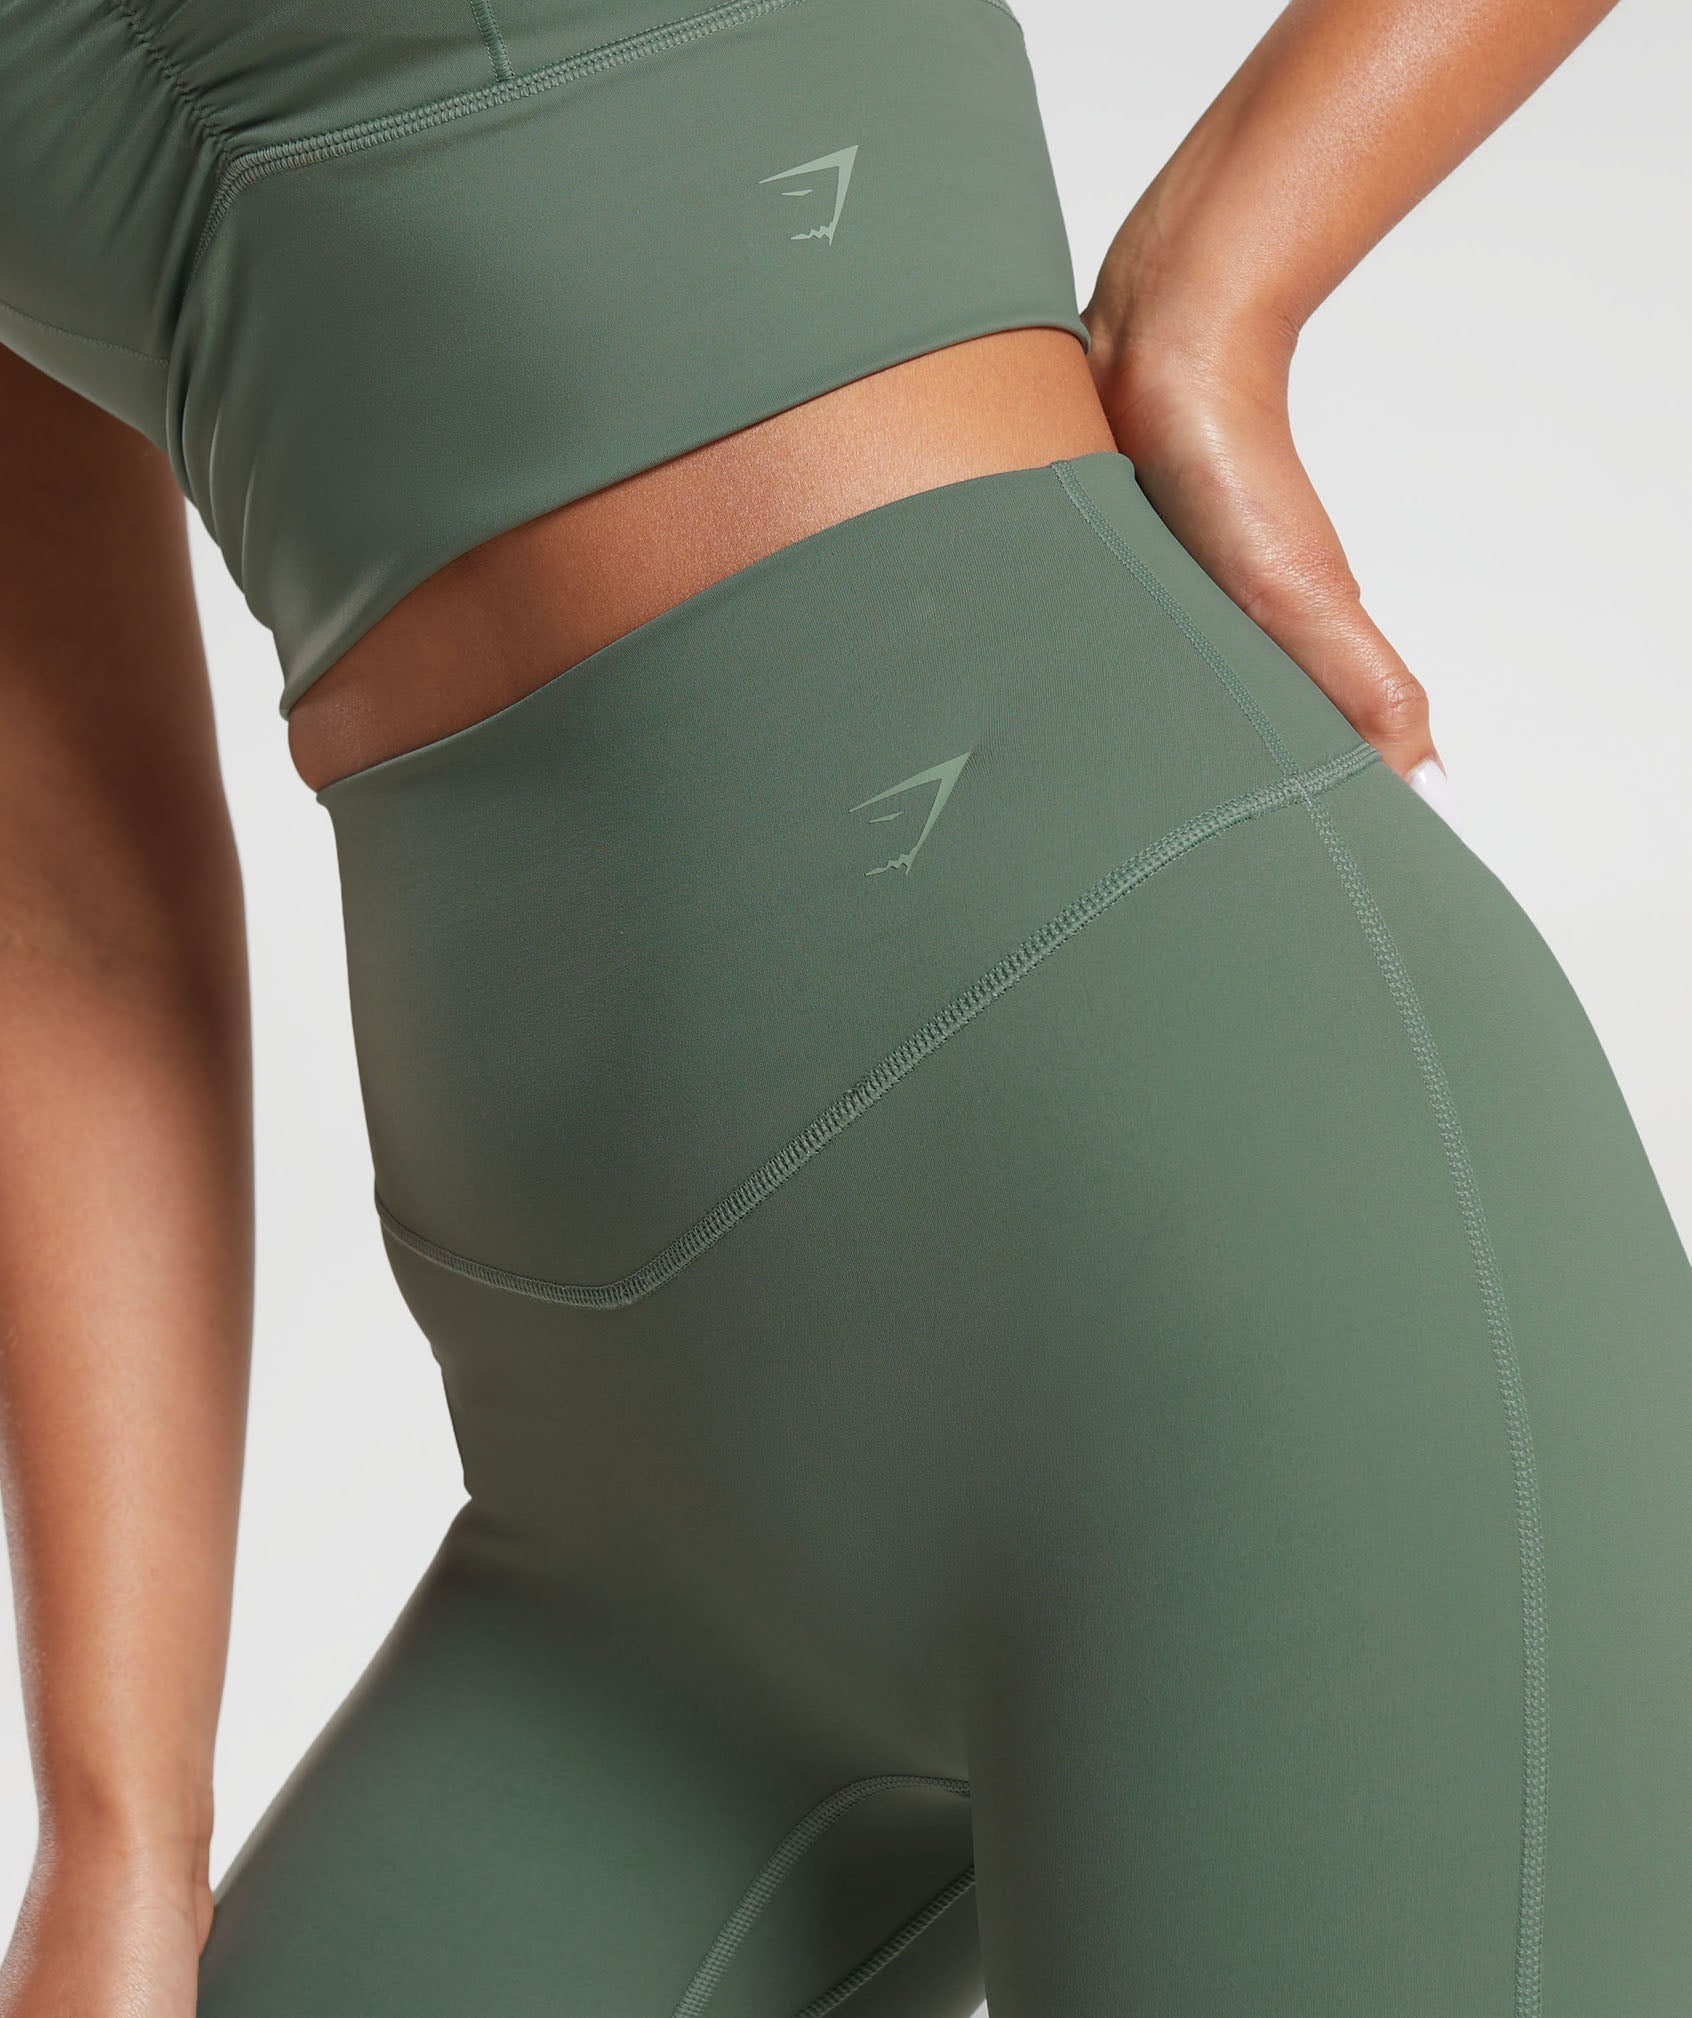 Buy Gymshark Green Fit Tights online